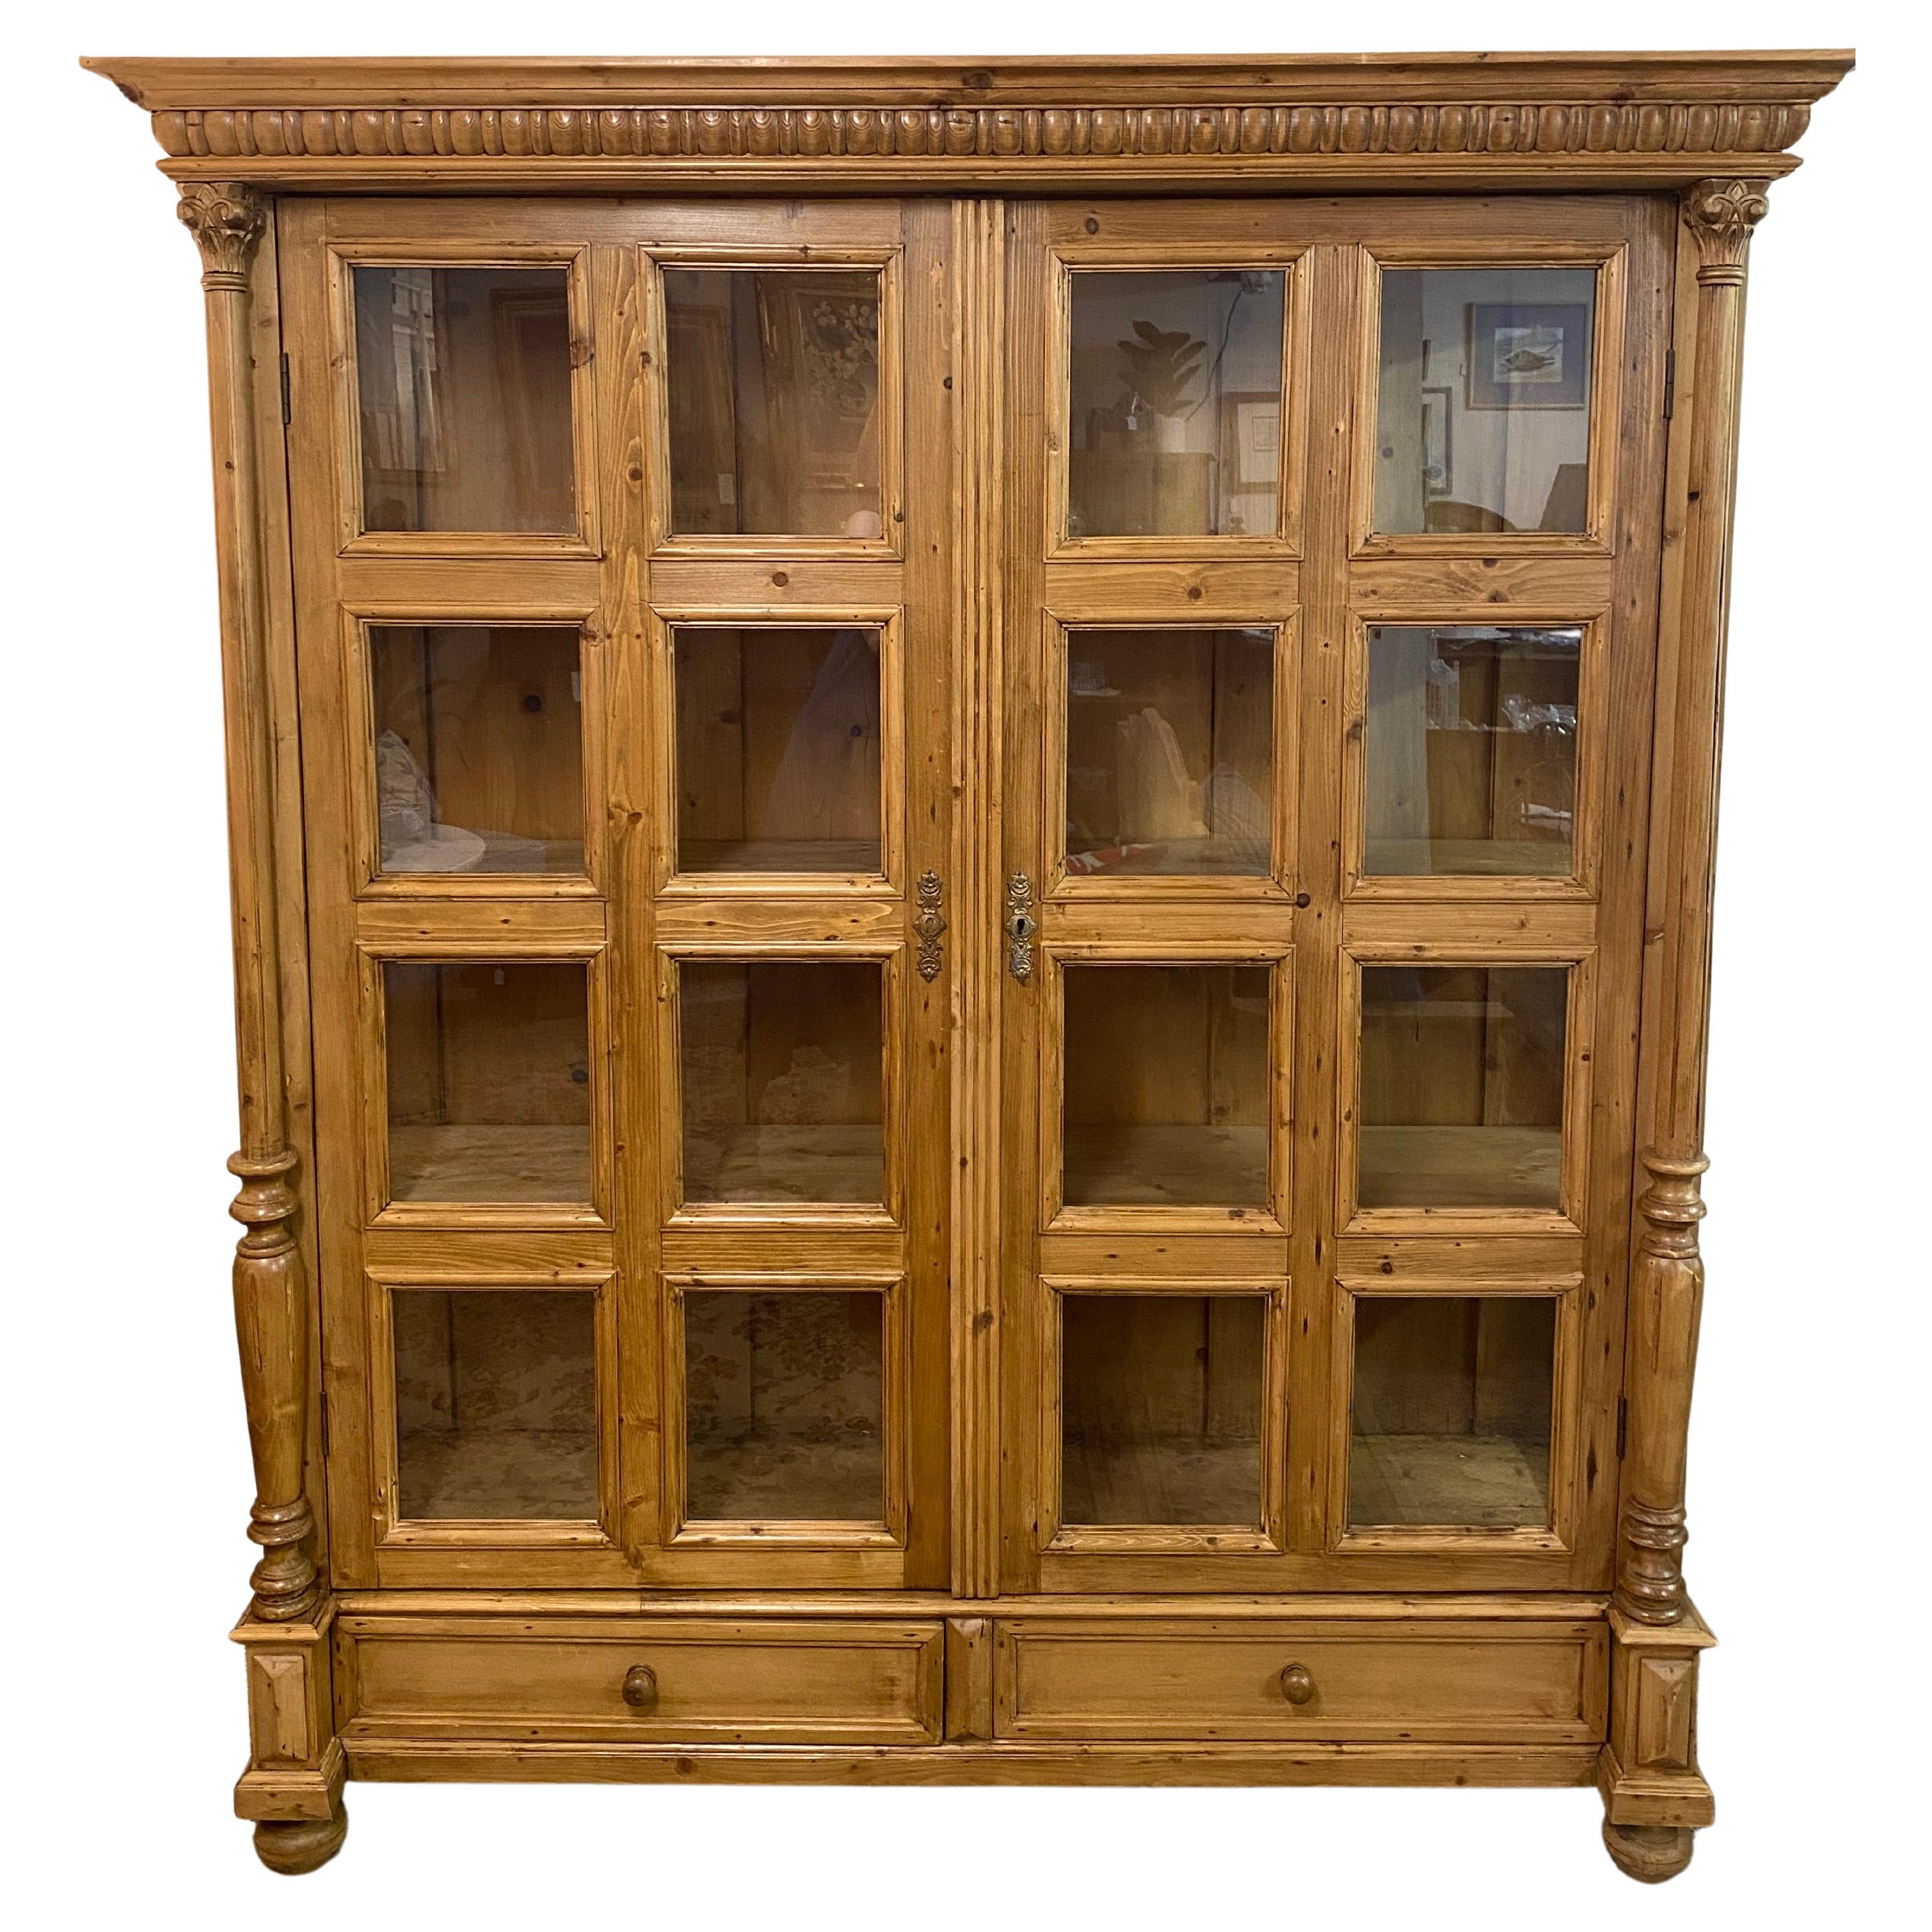 Monumental Pine Cabinet with Glass Panes and Lots of Storage